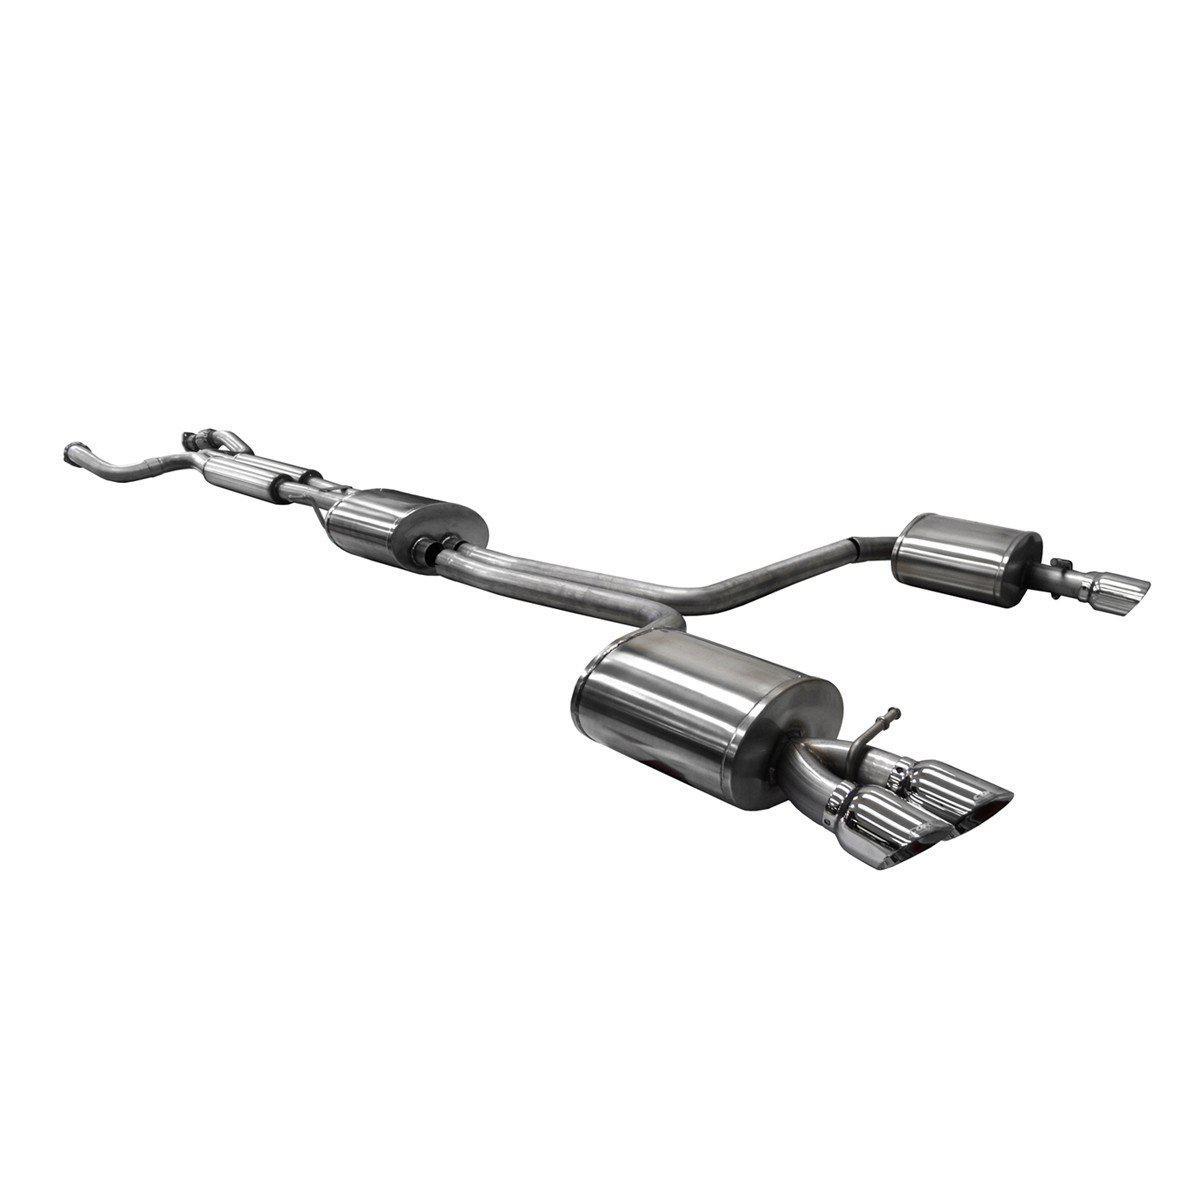 Corsa Performance B8 Audi S4/S5 3.0t Cat-Back Exhaust System-A Little Tuning Co